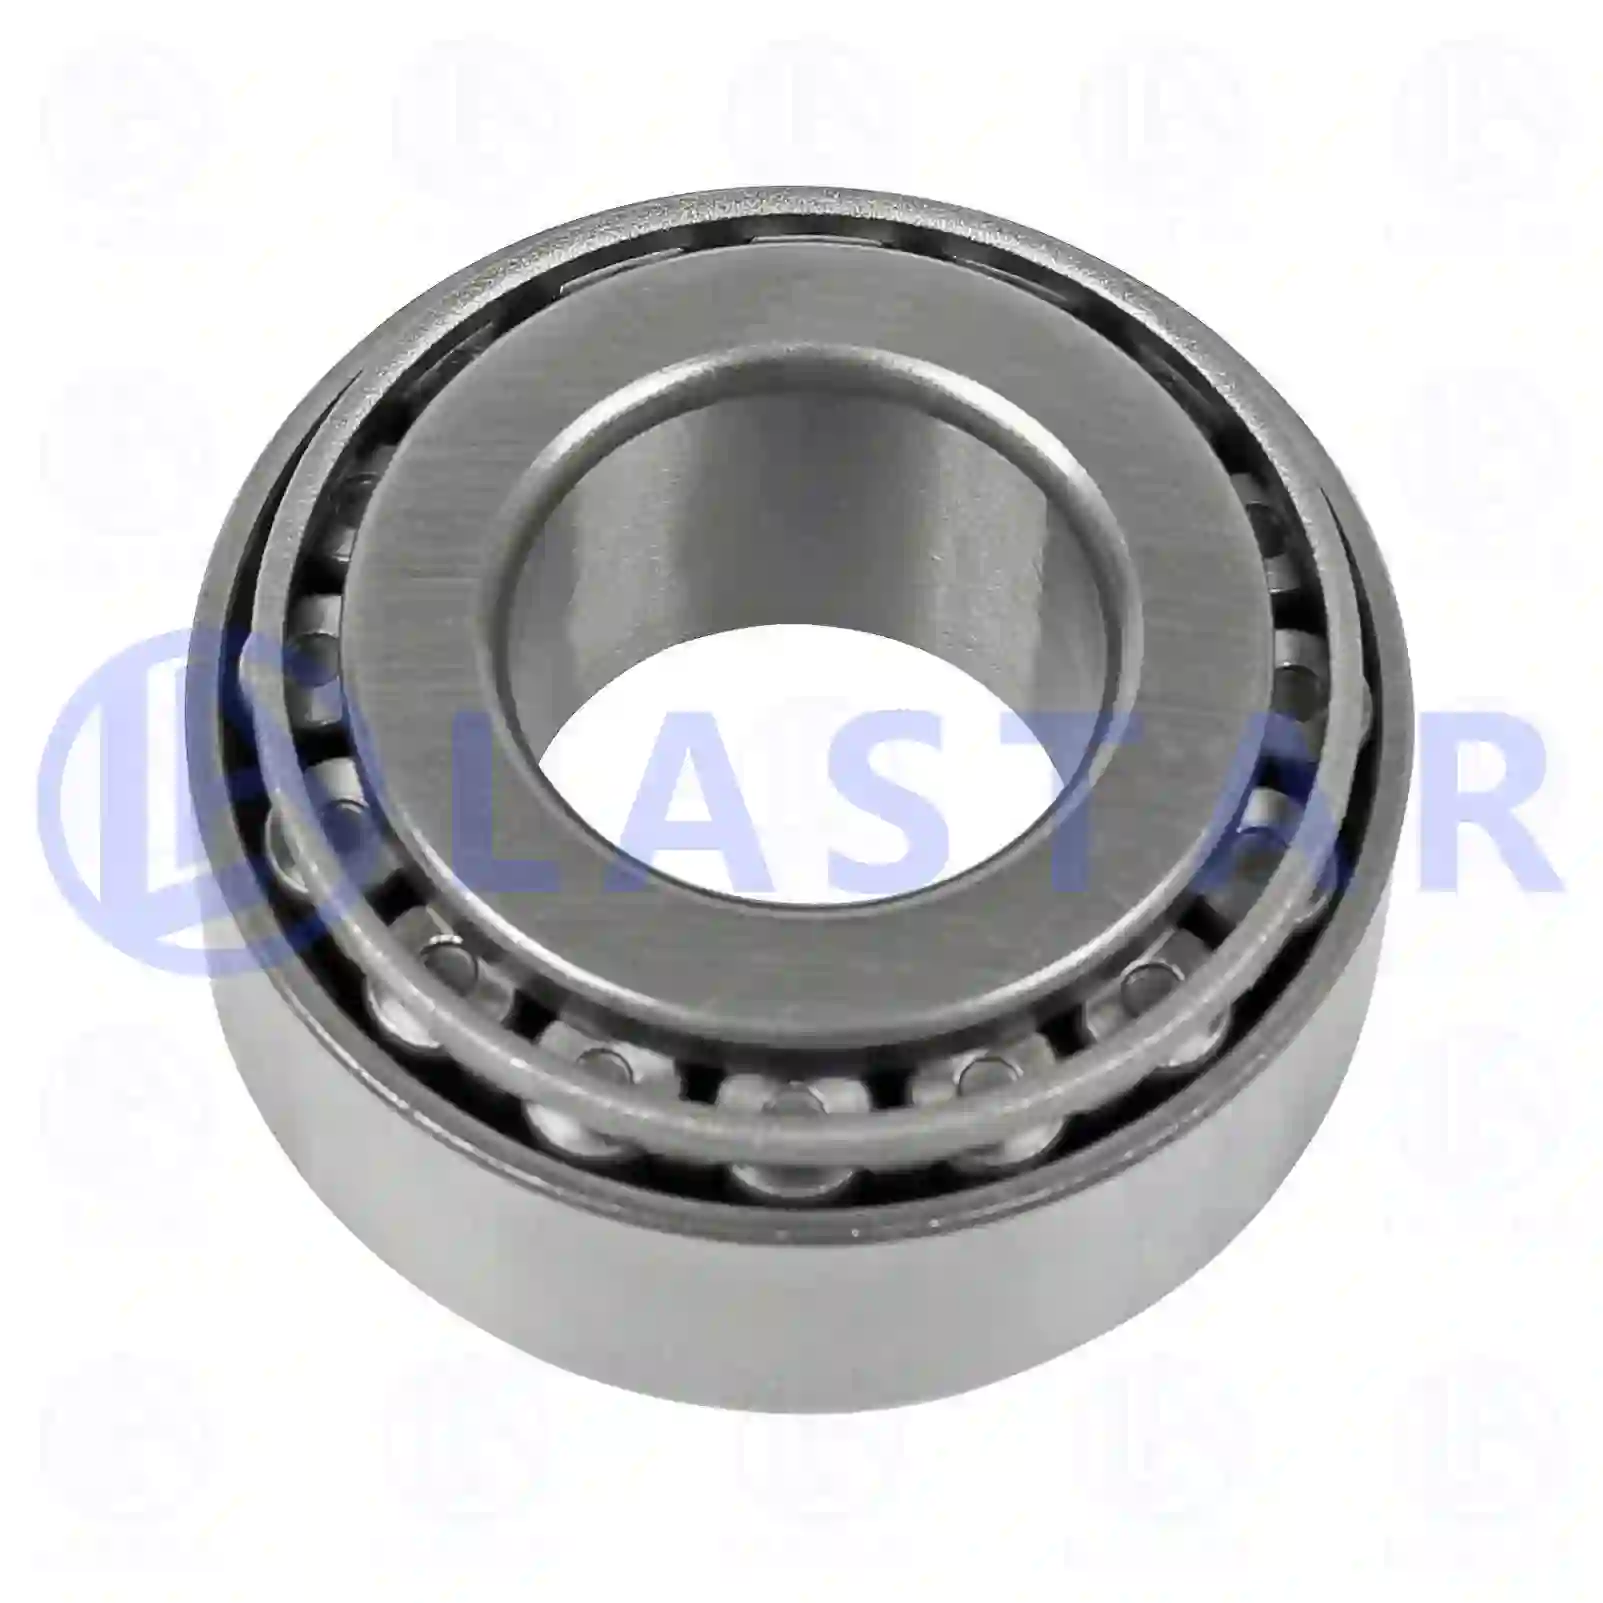 Tapered roller bearing, 77726056, 5103869AA, FRC7810, 06324990069, 81320500508, 0039811005, 0039811505, 0039819505, 0059812205, 0069815805, 1409810005, 1409810505, 5001852654, 5003090903, 5010136758, 2D0407625, ZG03018-0008 ||  77726056 Lastar Spare Part | Truck Spare Parts, Auotomotive Spare Parts Tapered roller bearing, 77726056, 5103869AA, FRC7810, 06324990069, 81320500508, 0039811005, 0039811505, 0039819505, 0059812205, 0069815805, 1409810005, 1409810505, 5001852654, 5003090903, 5010136758, 2D0407625, ZG03018-0008 ||  77726056 Lastar Spare Part | Truck Spare Parts, Auotomotive Spare Parts